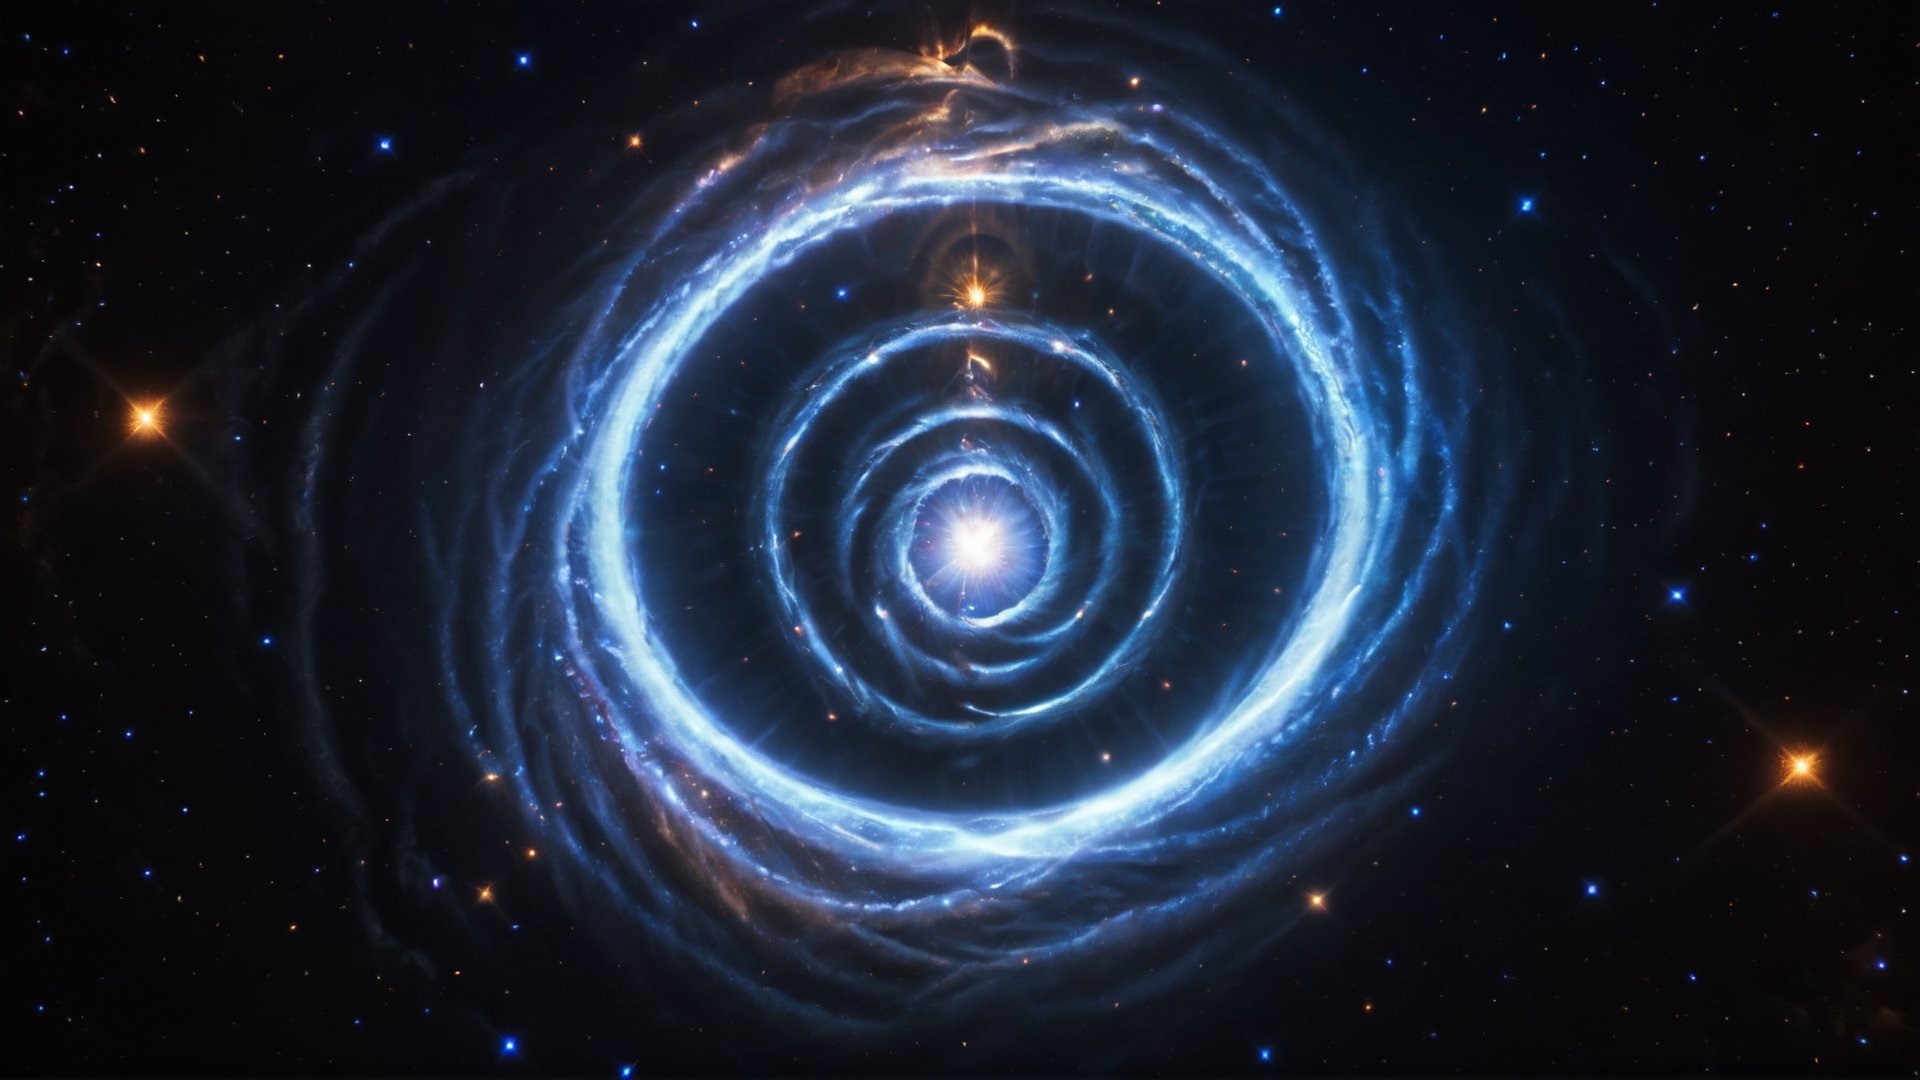 (((Cinematic a giant Lord Shiva divine:2))), serene, Epic scene, God of destruction, divine, stars, galaxy surround, (galaxy_way_spiral:1.5), glowing, aura, floating objects, magnetic field, sprial, spectral, astral, eye shape, close up shot